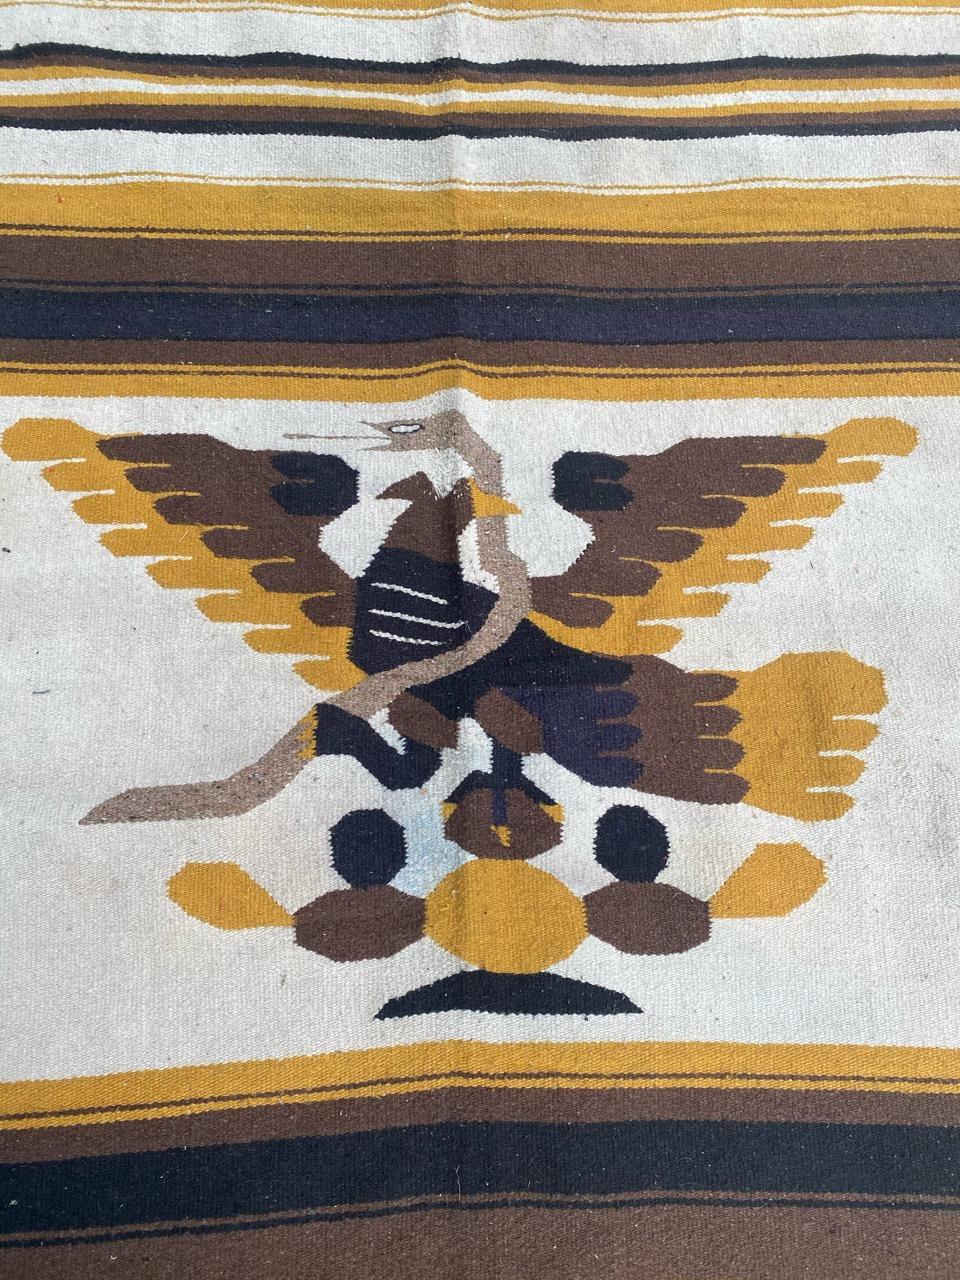 Nice mid century South American tapestry with beautiful design with eagle and brown and yellow colors, entirely hand woven with wool on cotton foundation.

✨✨✨
